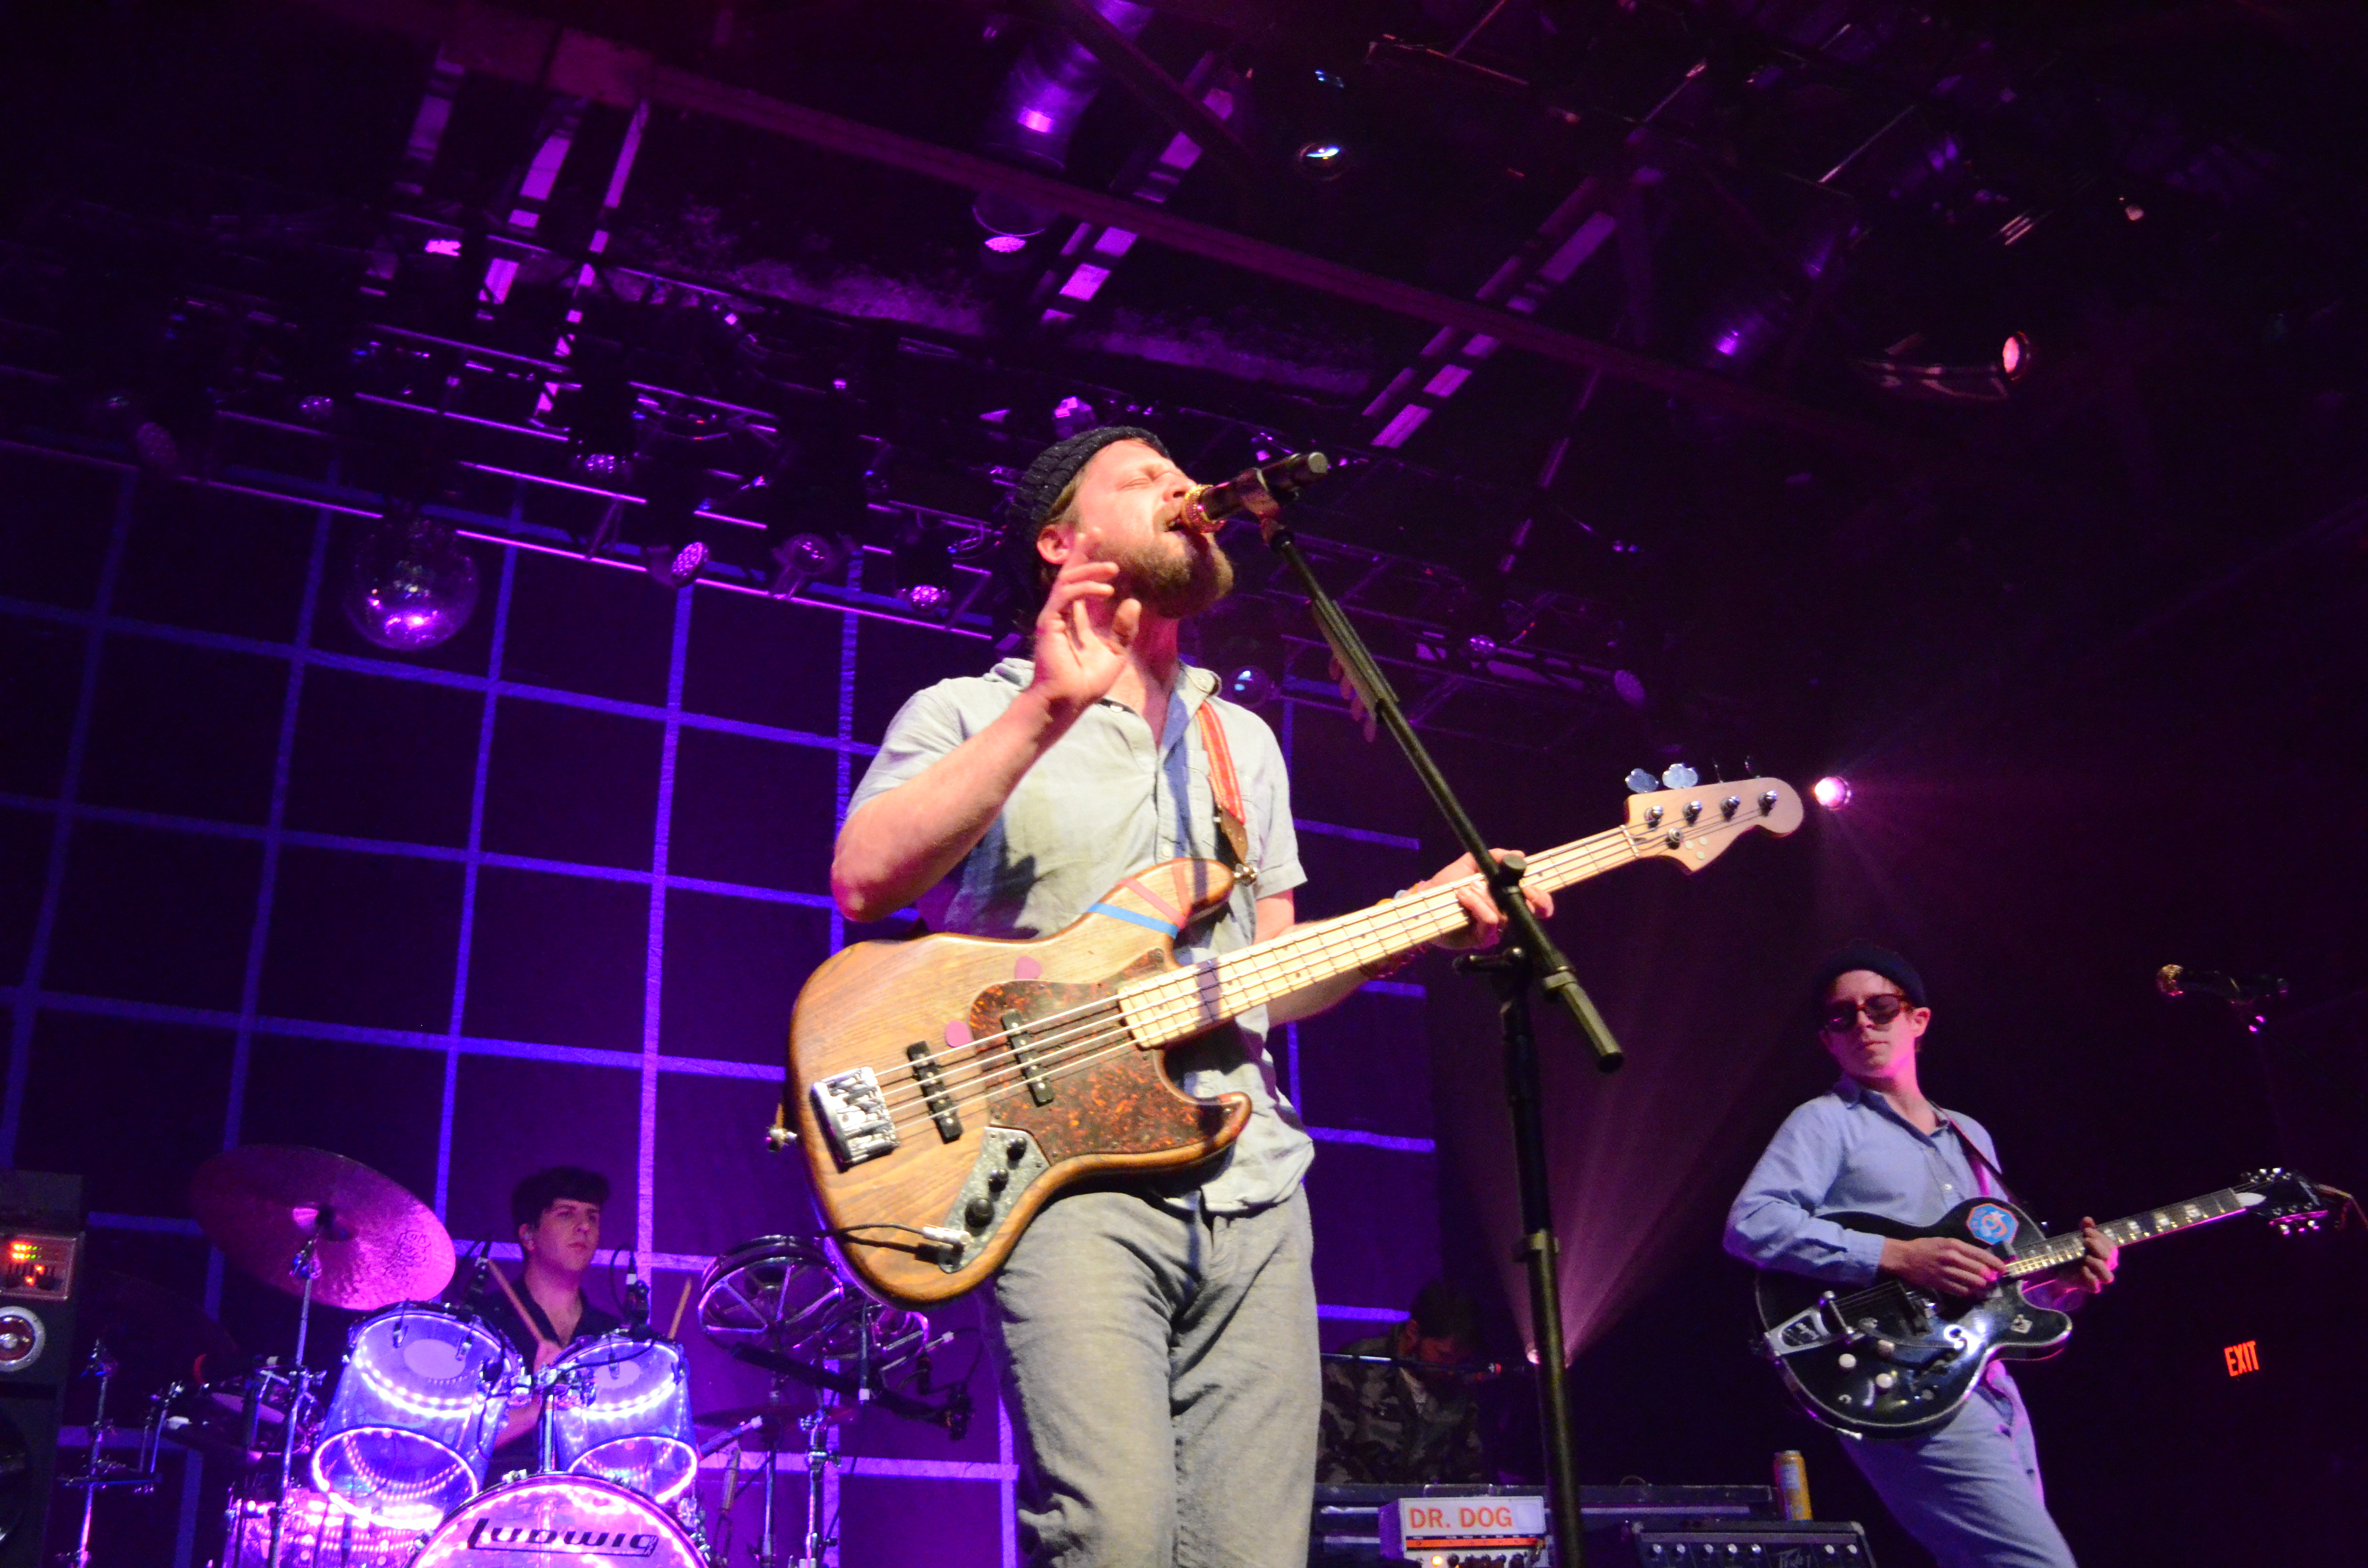 Dr. Dog played to a sold out crowd at the Fillmore